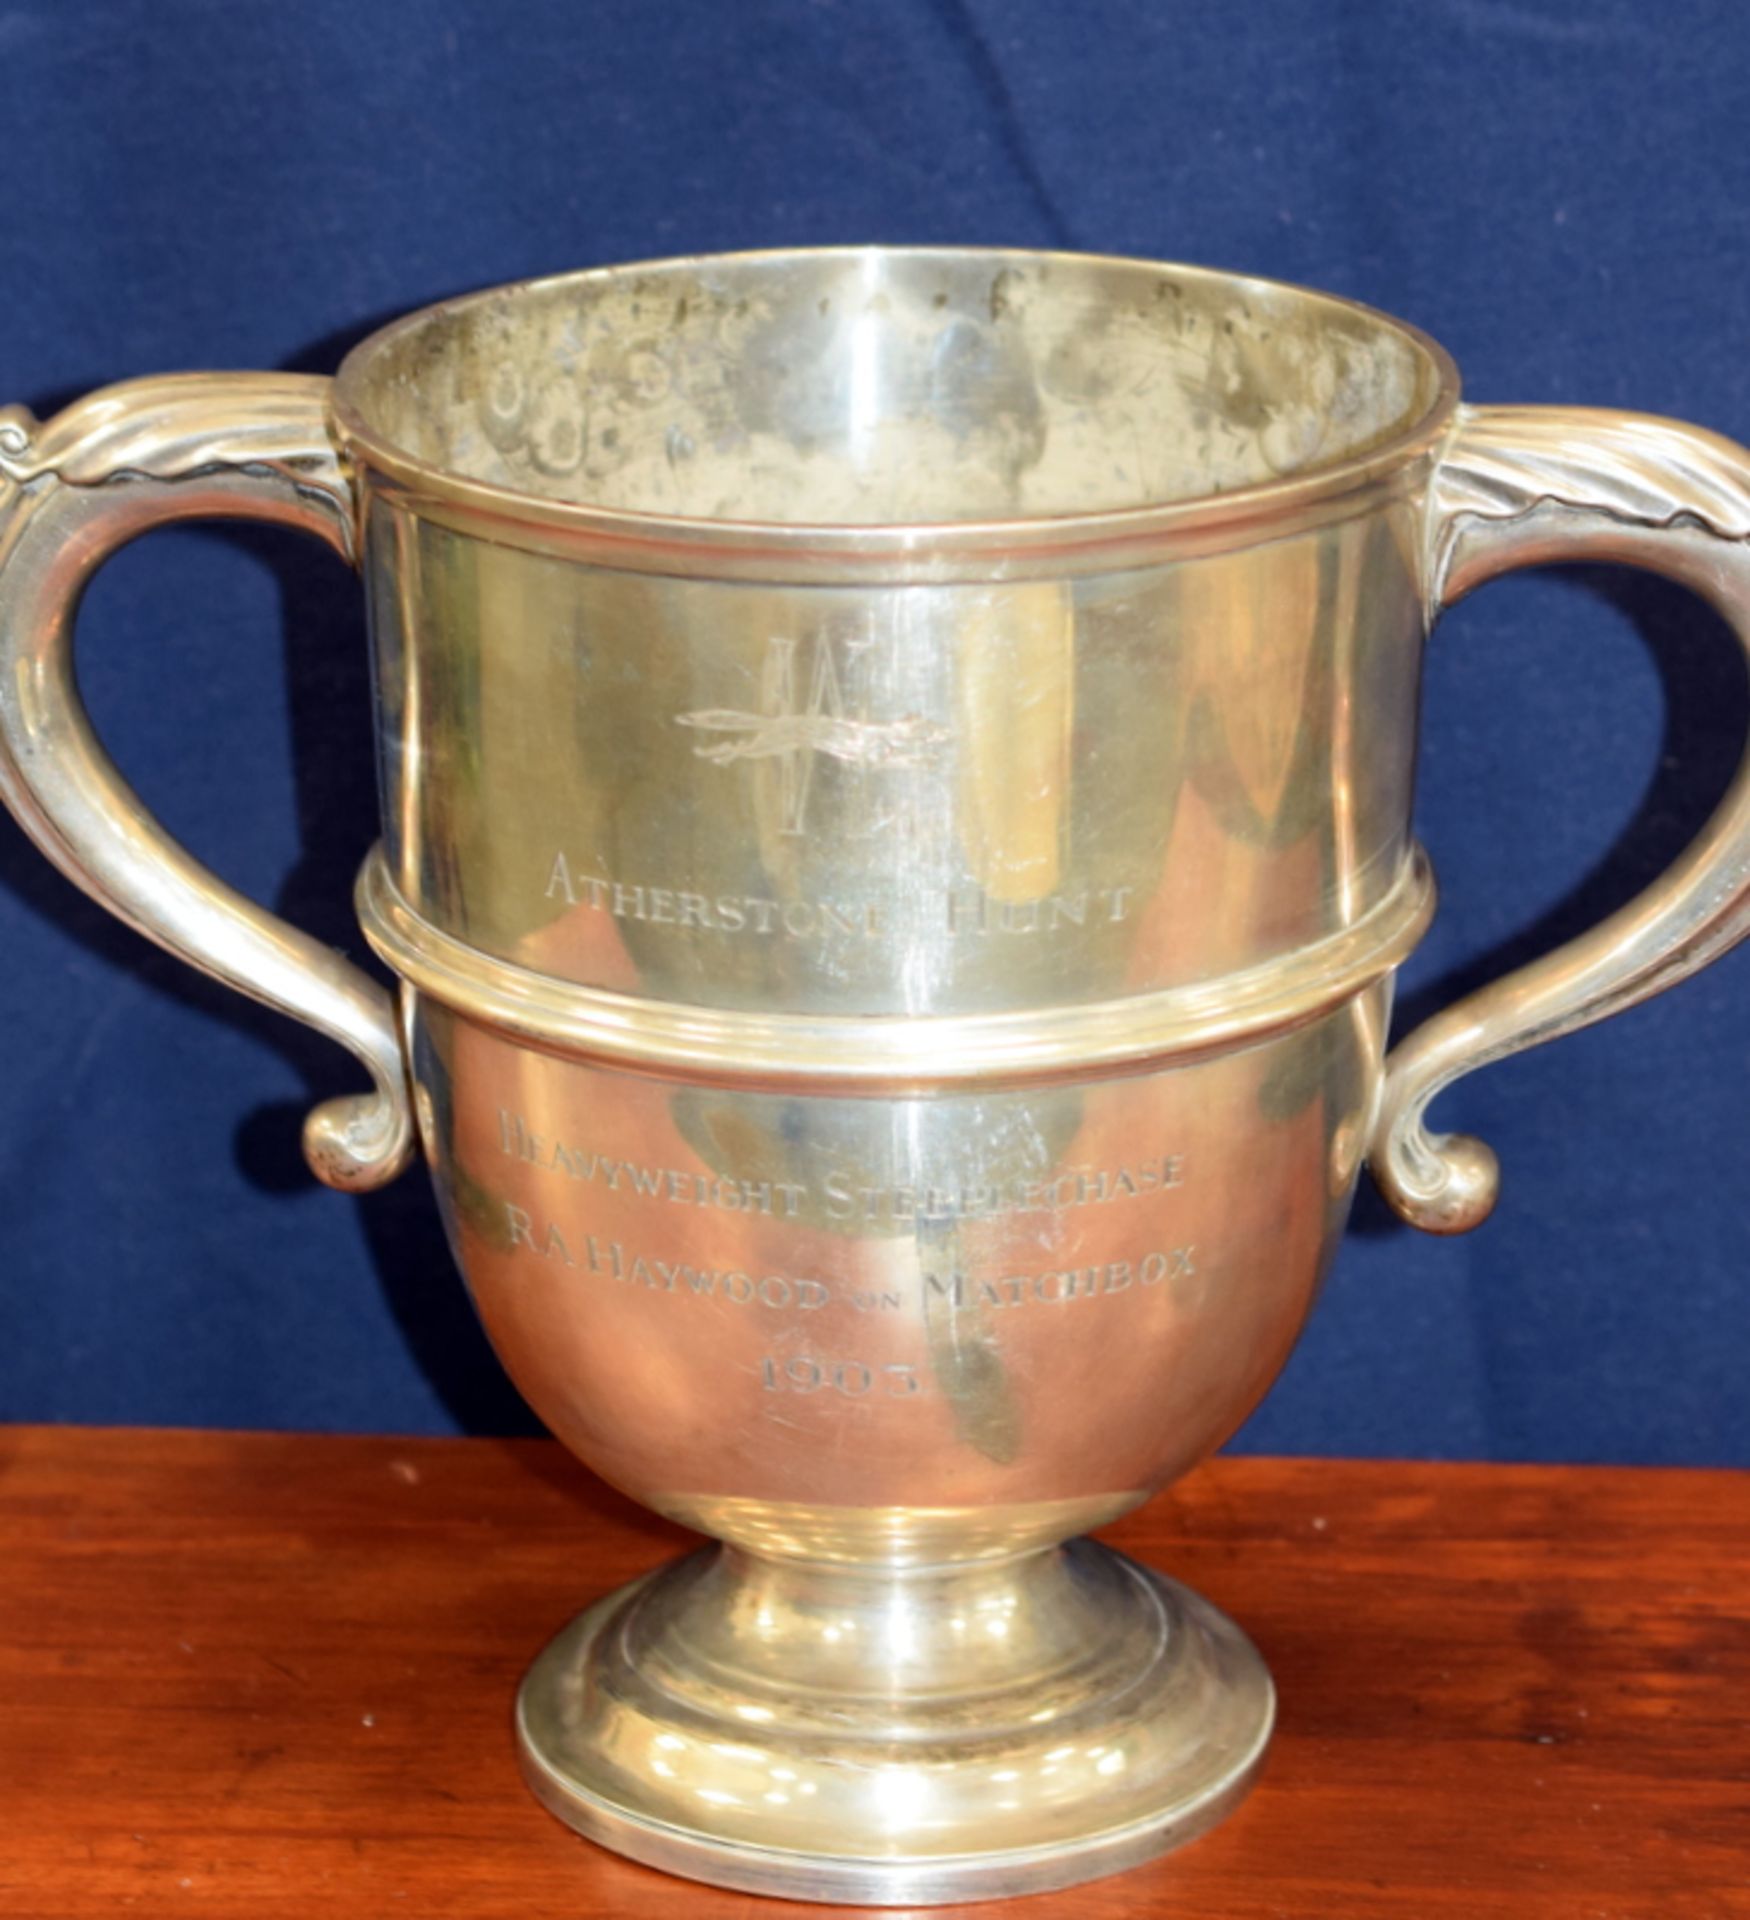 Heavy Solid Silver Atherstone Hunt Cup 1903